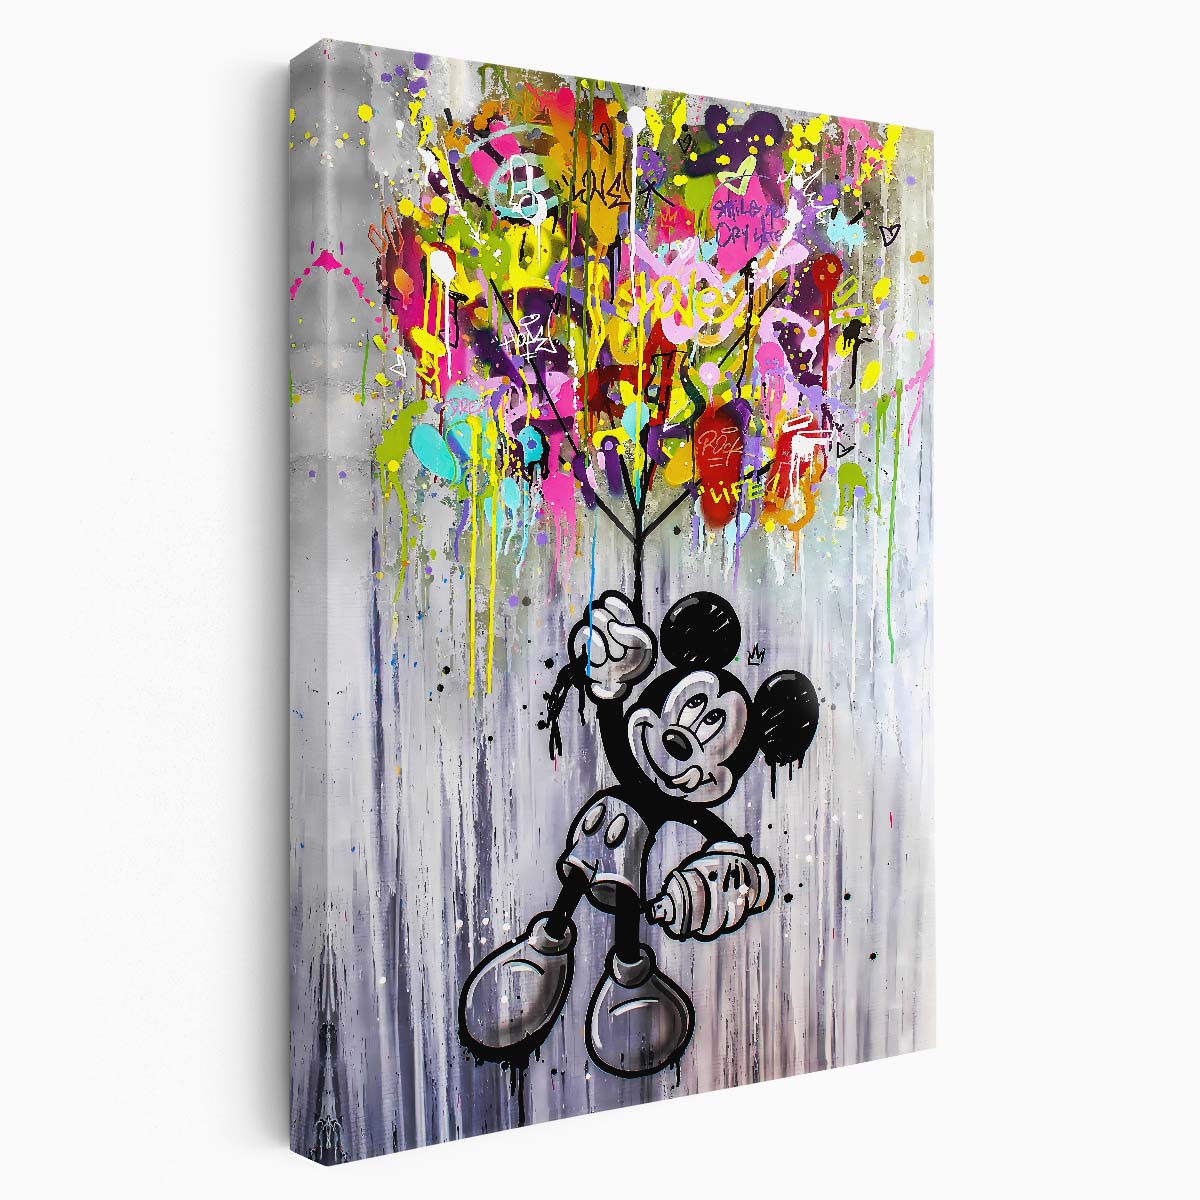 Mickey Mouse Holding Balloons Graffiti Wall Art by Luxuriance Designs. Made in USA.